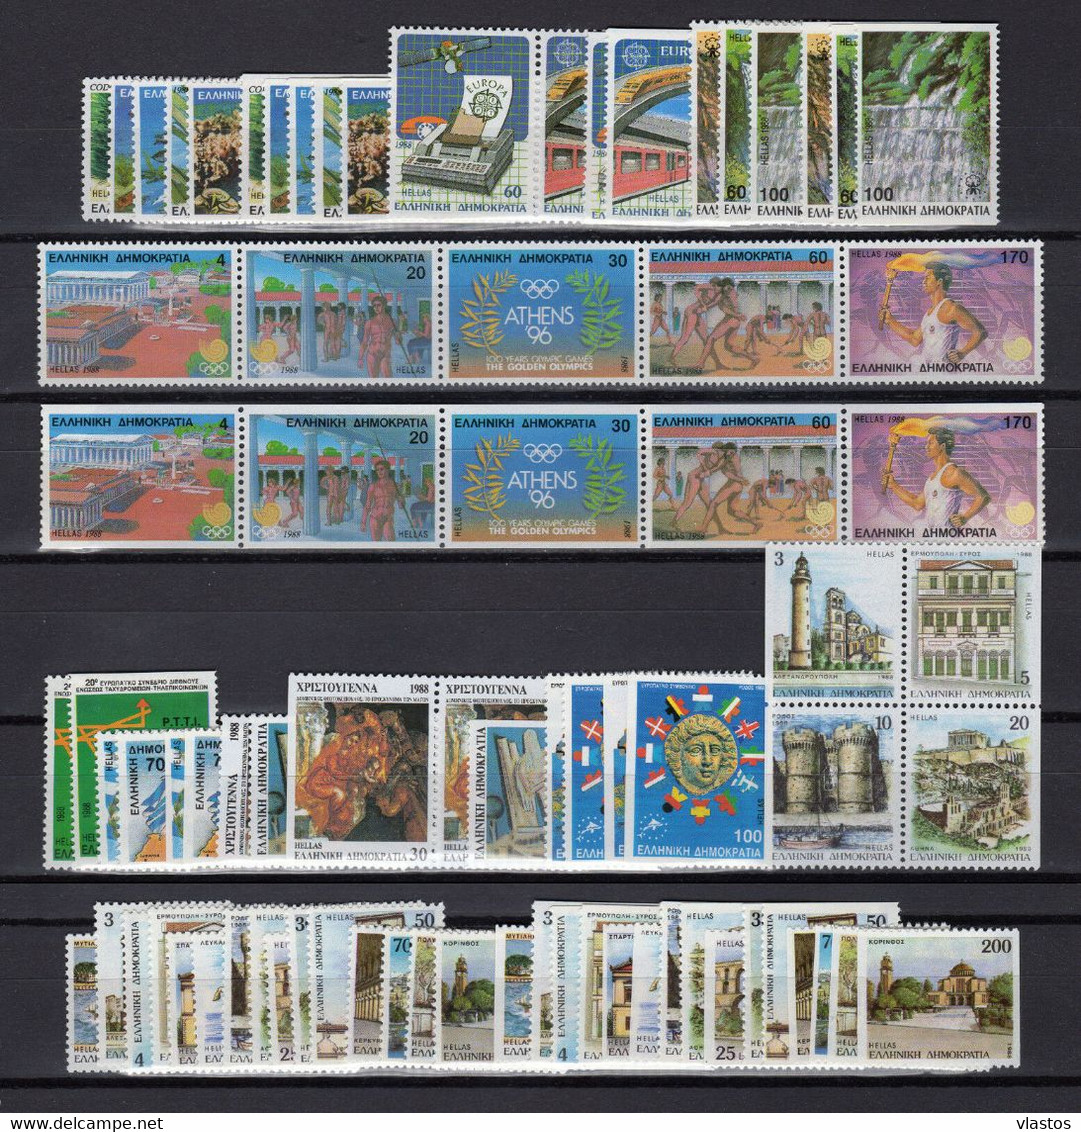 GREECE 1988 COMPLETE YEAR - PERFORATED+IMPERFORATED STAMPS MNH - Années Complètes